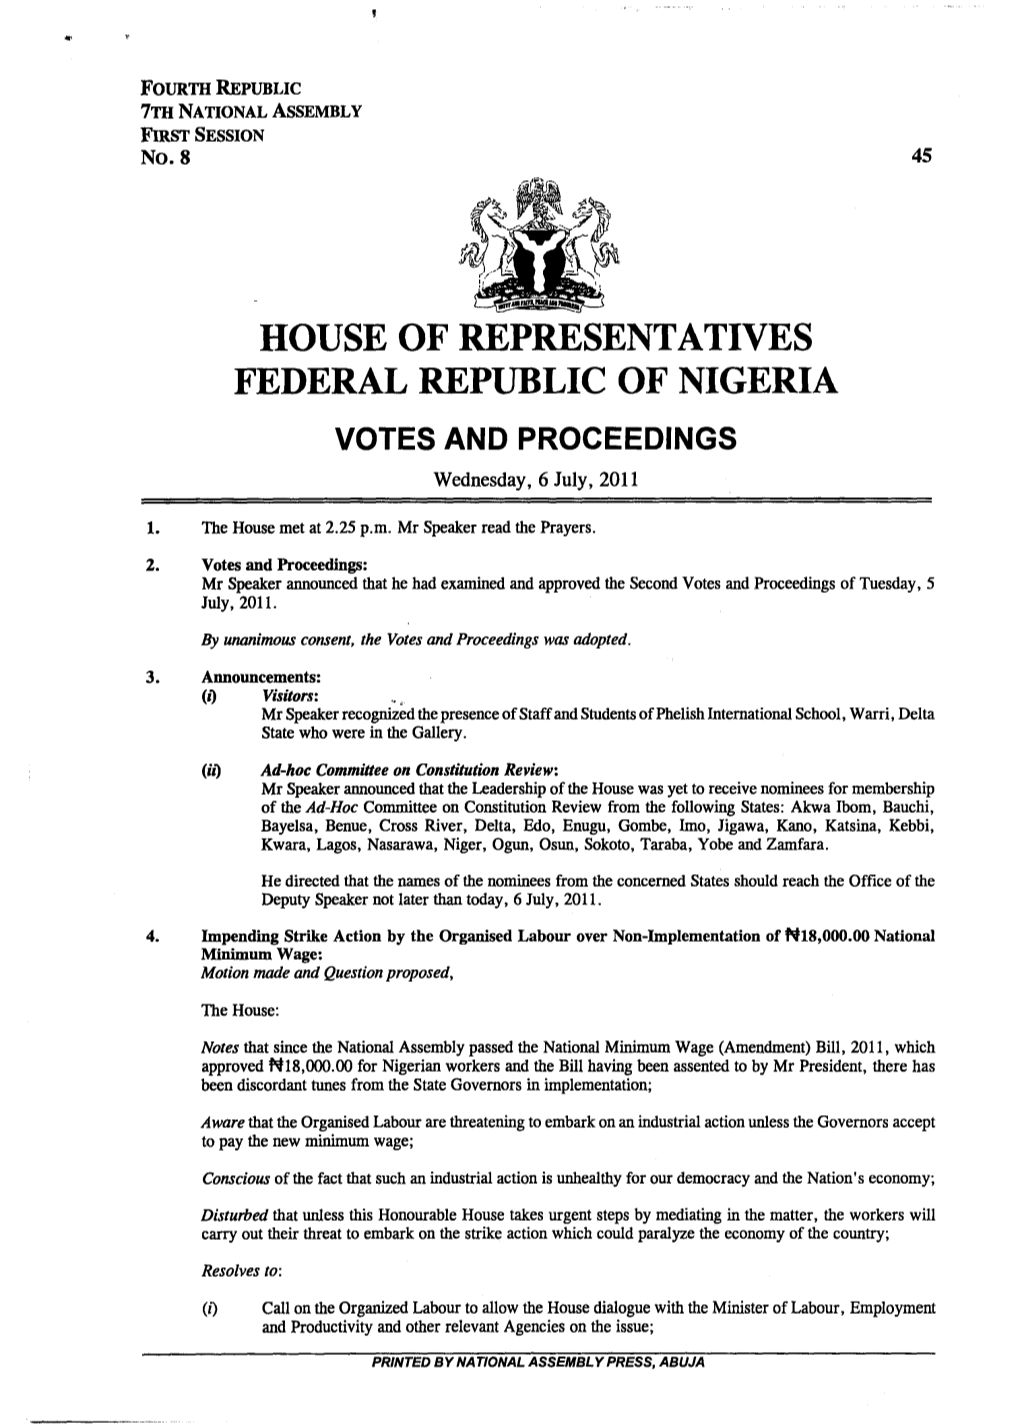 HOUSE of REPRESENTATIVES FEDERAL REPUBLIC of NIGERIA VOTES and PROCEEDINGS Wednesday, 6 July, 2011